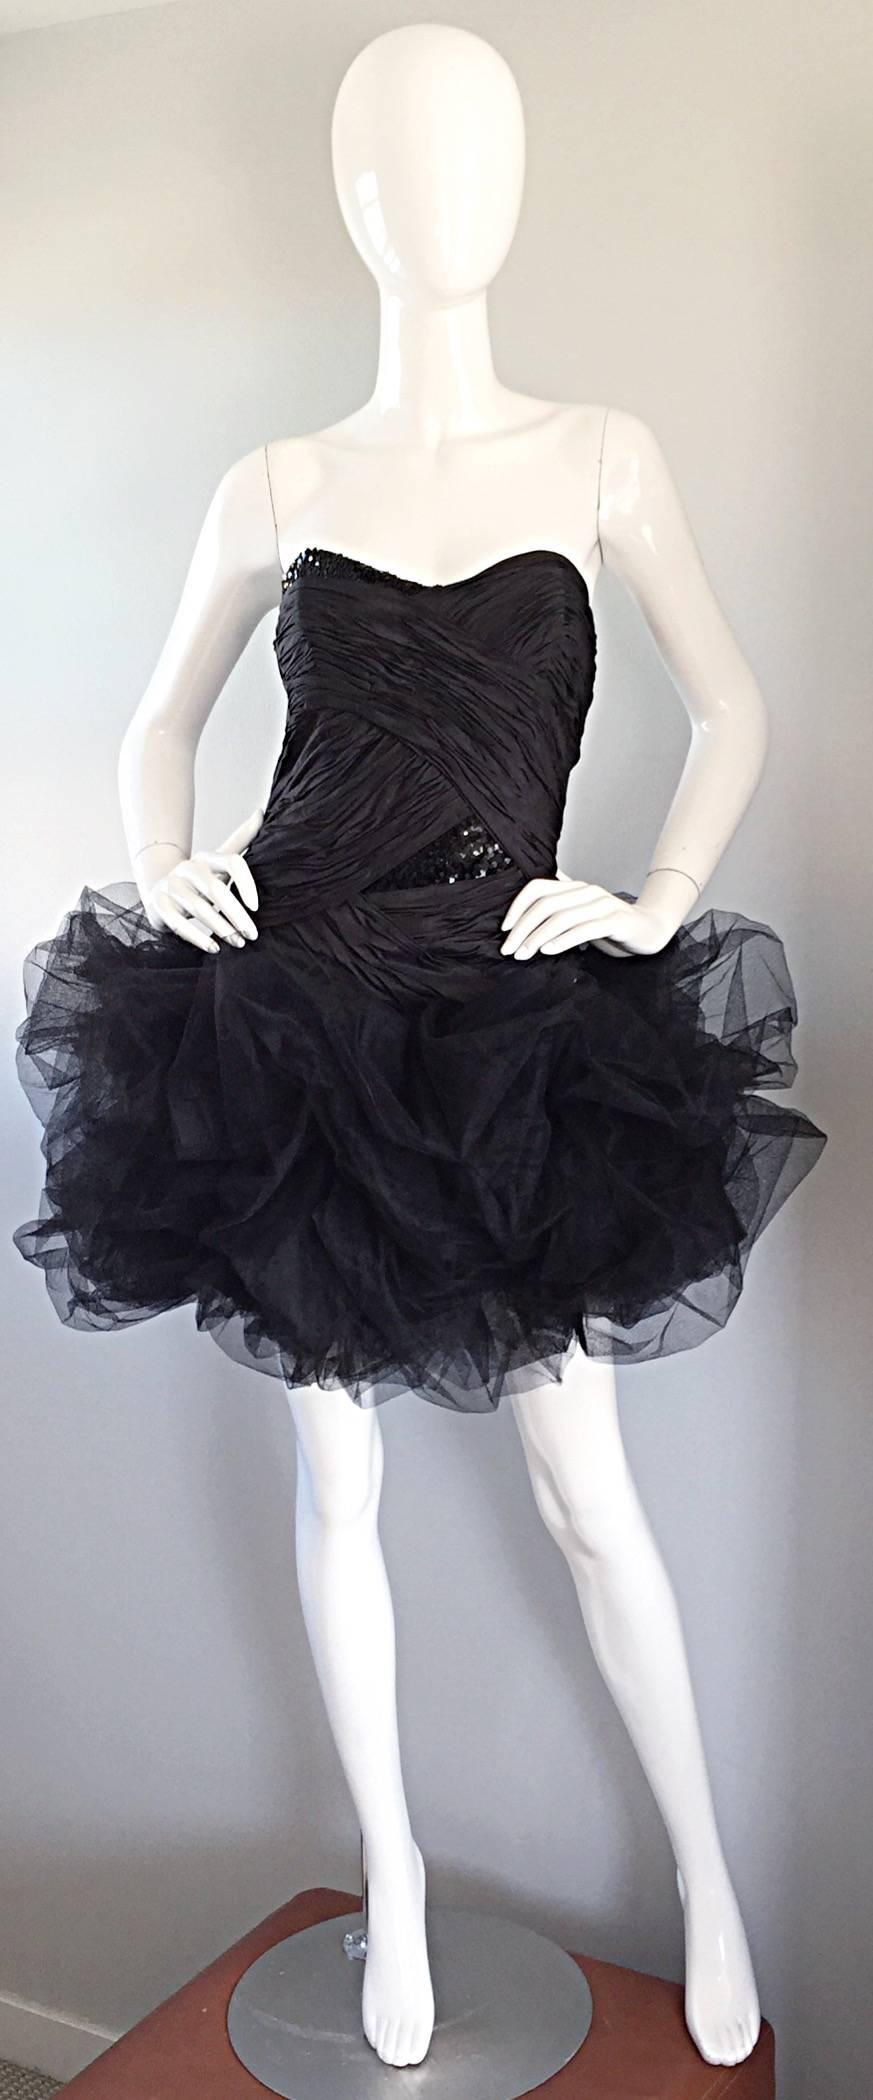 Sensational vintage 1980s PAUL-LOUIS ORRIER COUTURE black silk taffeta strapless 'pouf' dress! Flattering hand-pleated bodice, with a section of black sequins at waist and side bust. Layers and layers of black tulle on the skirt make an amazing